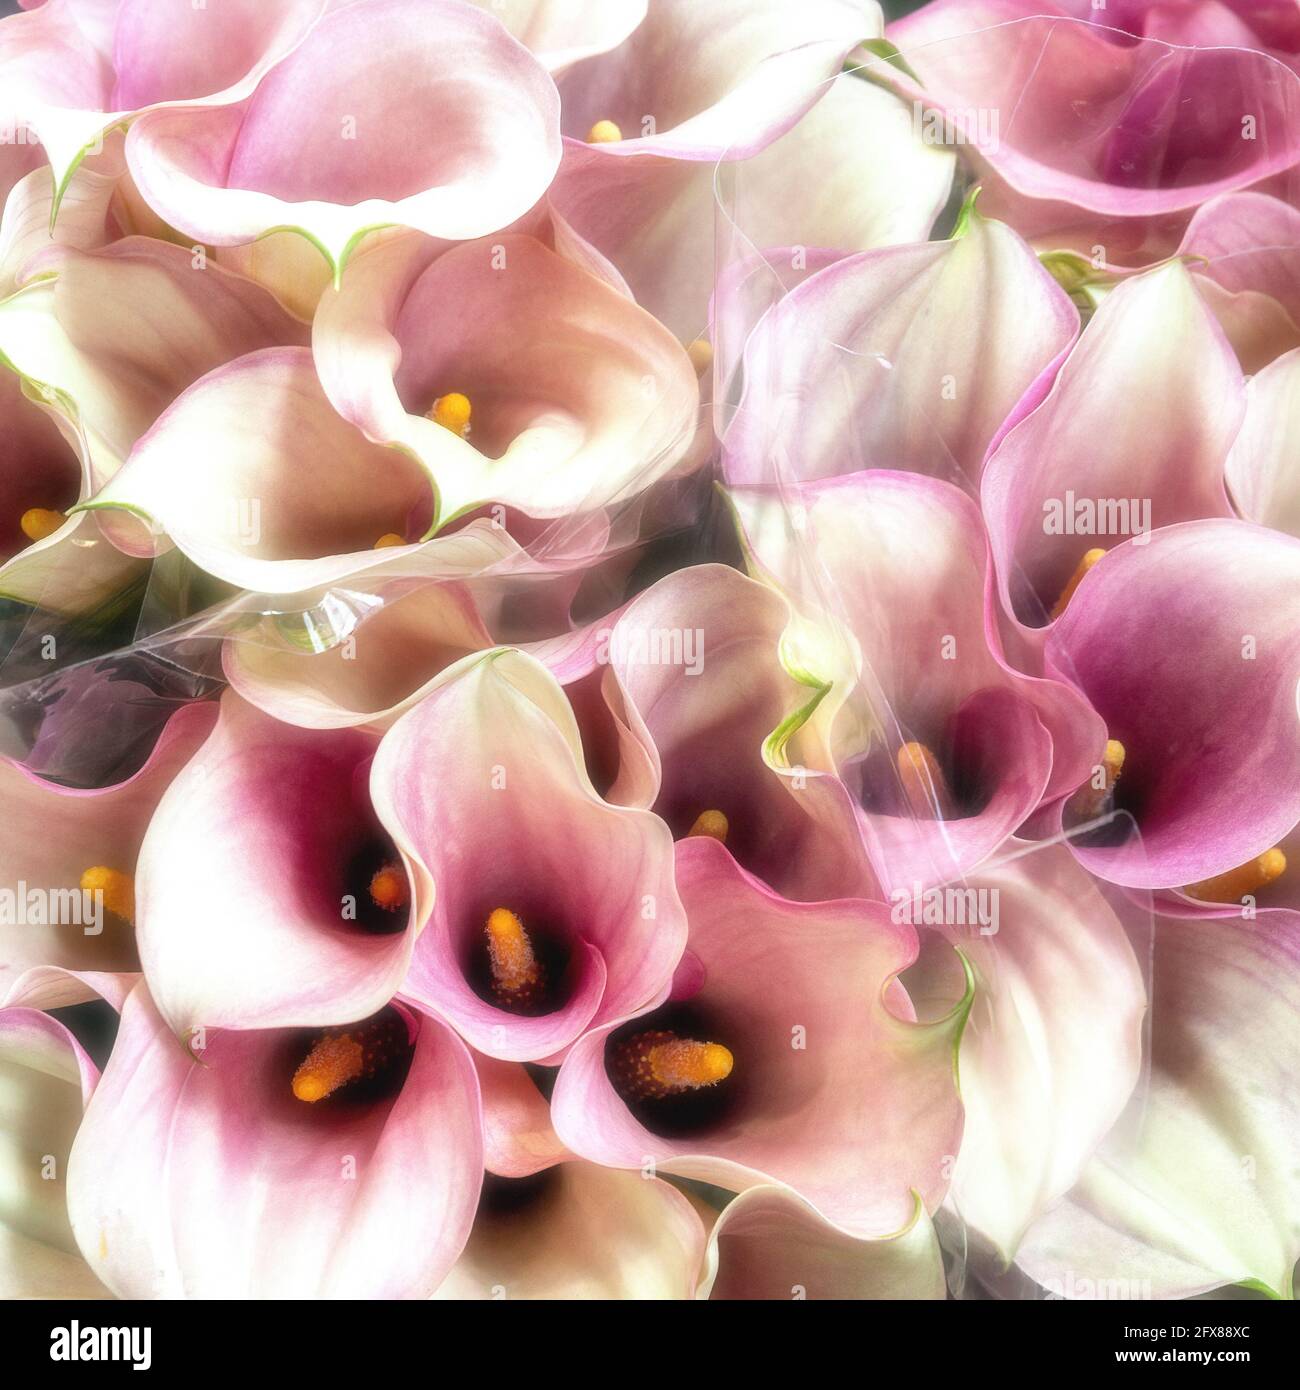 Dreamy Style Background Of Pink And White Calla Lily Bouquets This